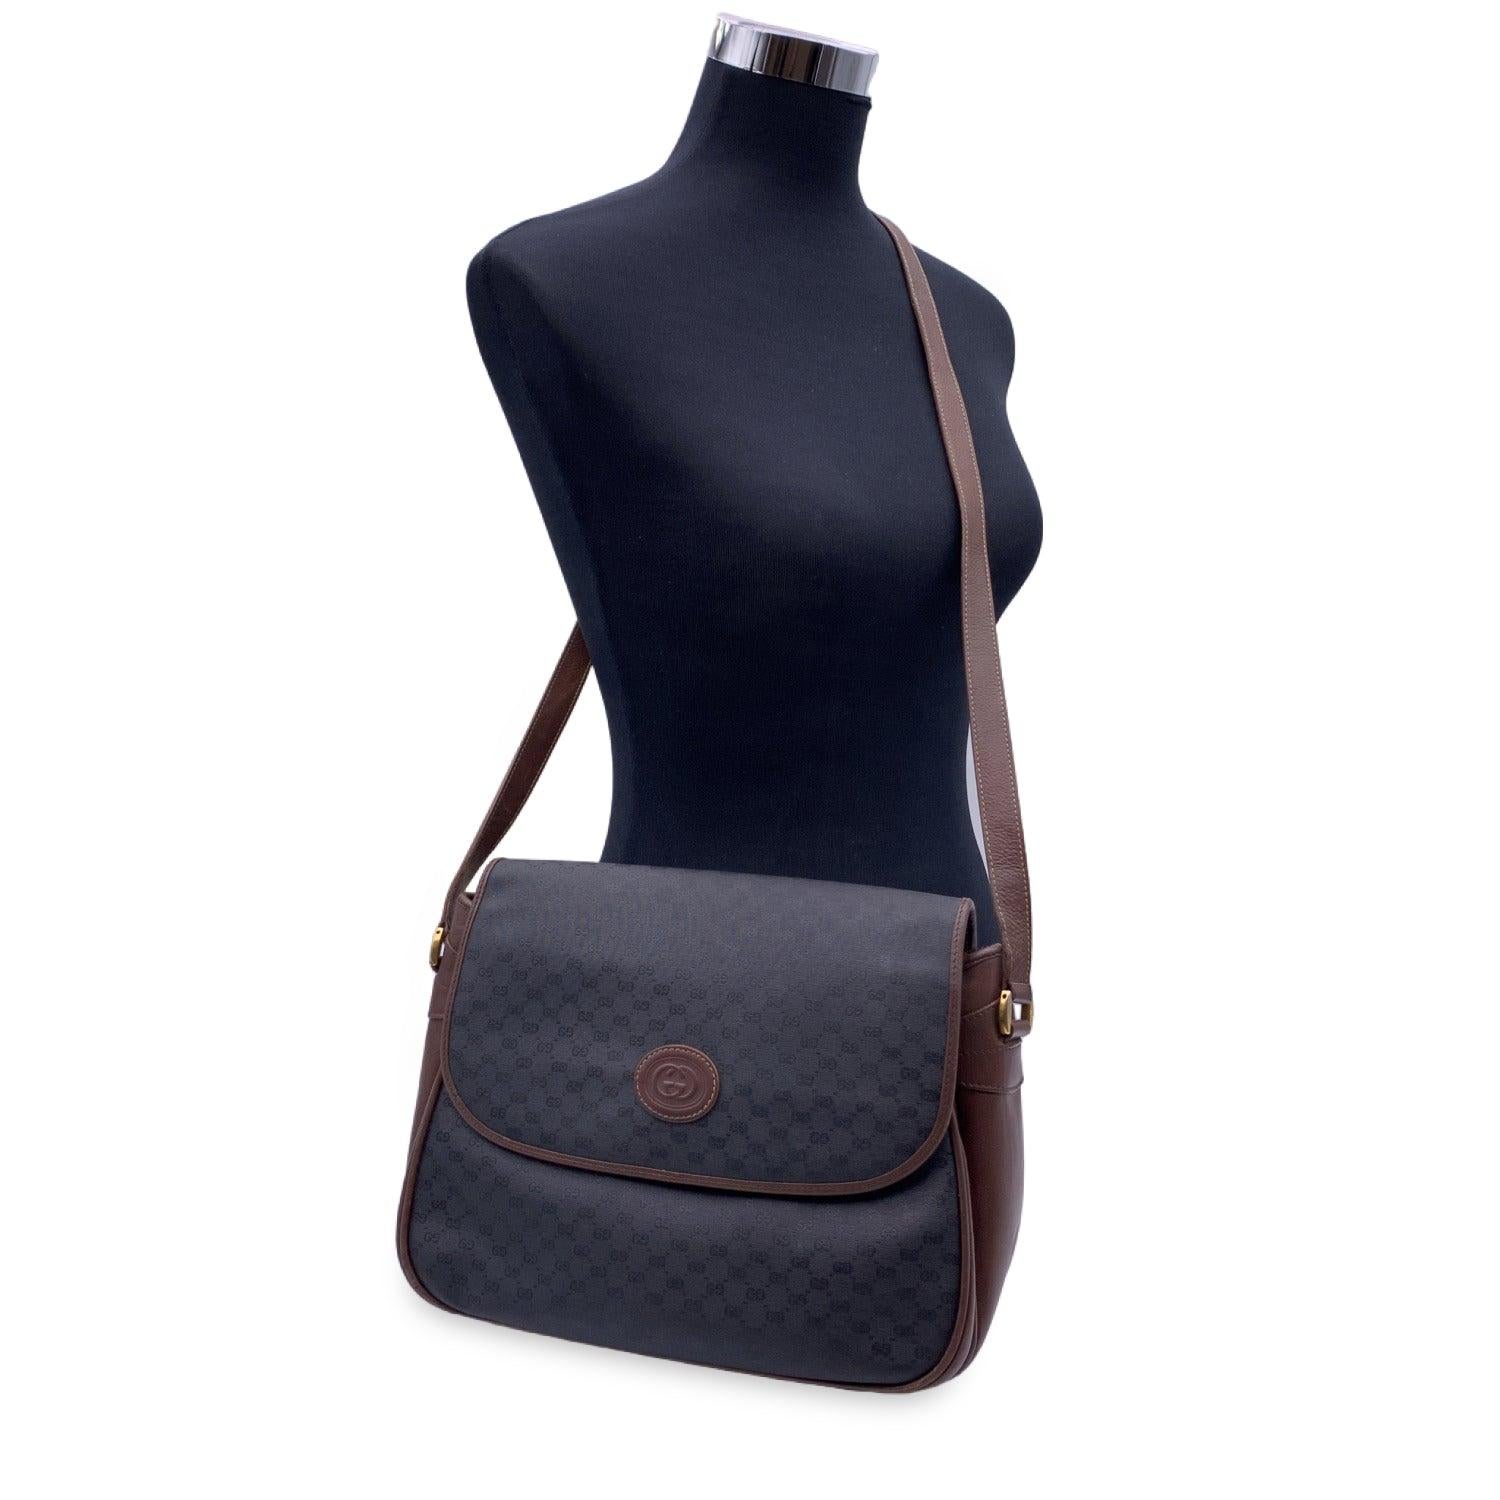 Gucci black monogram canvas shoulder bag with brown leather shoulder strap and trim. The bag features a front flap with magnetic button closure. 1 pocket under the flap. Canvas lining with 1 side zip pocket inside. 'Gucci - Italy' crest tag inside